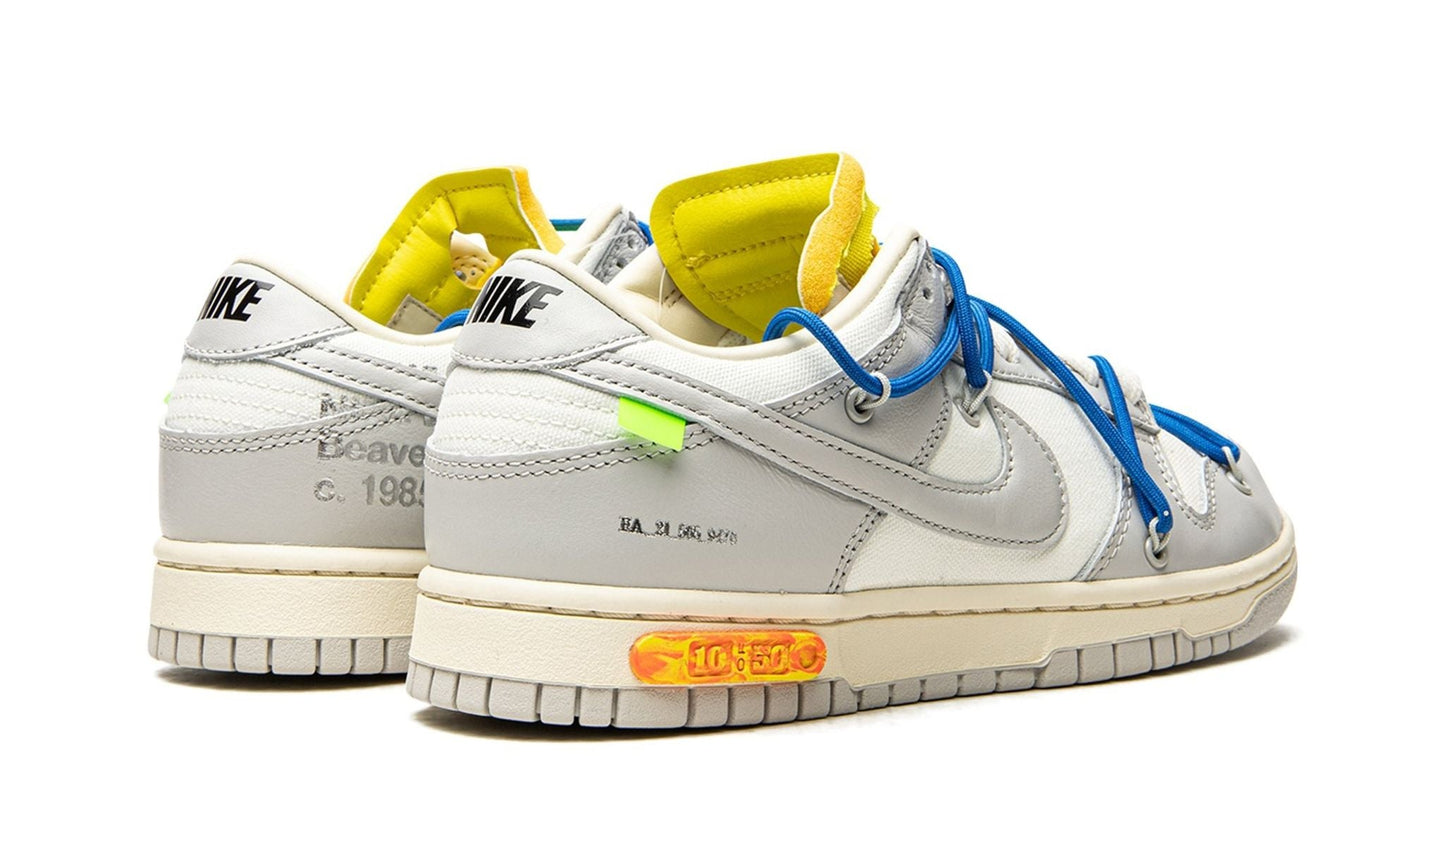 NIKE X OFF-WHITE DUNK LOW "Off-White - Lot 10"